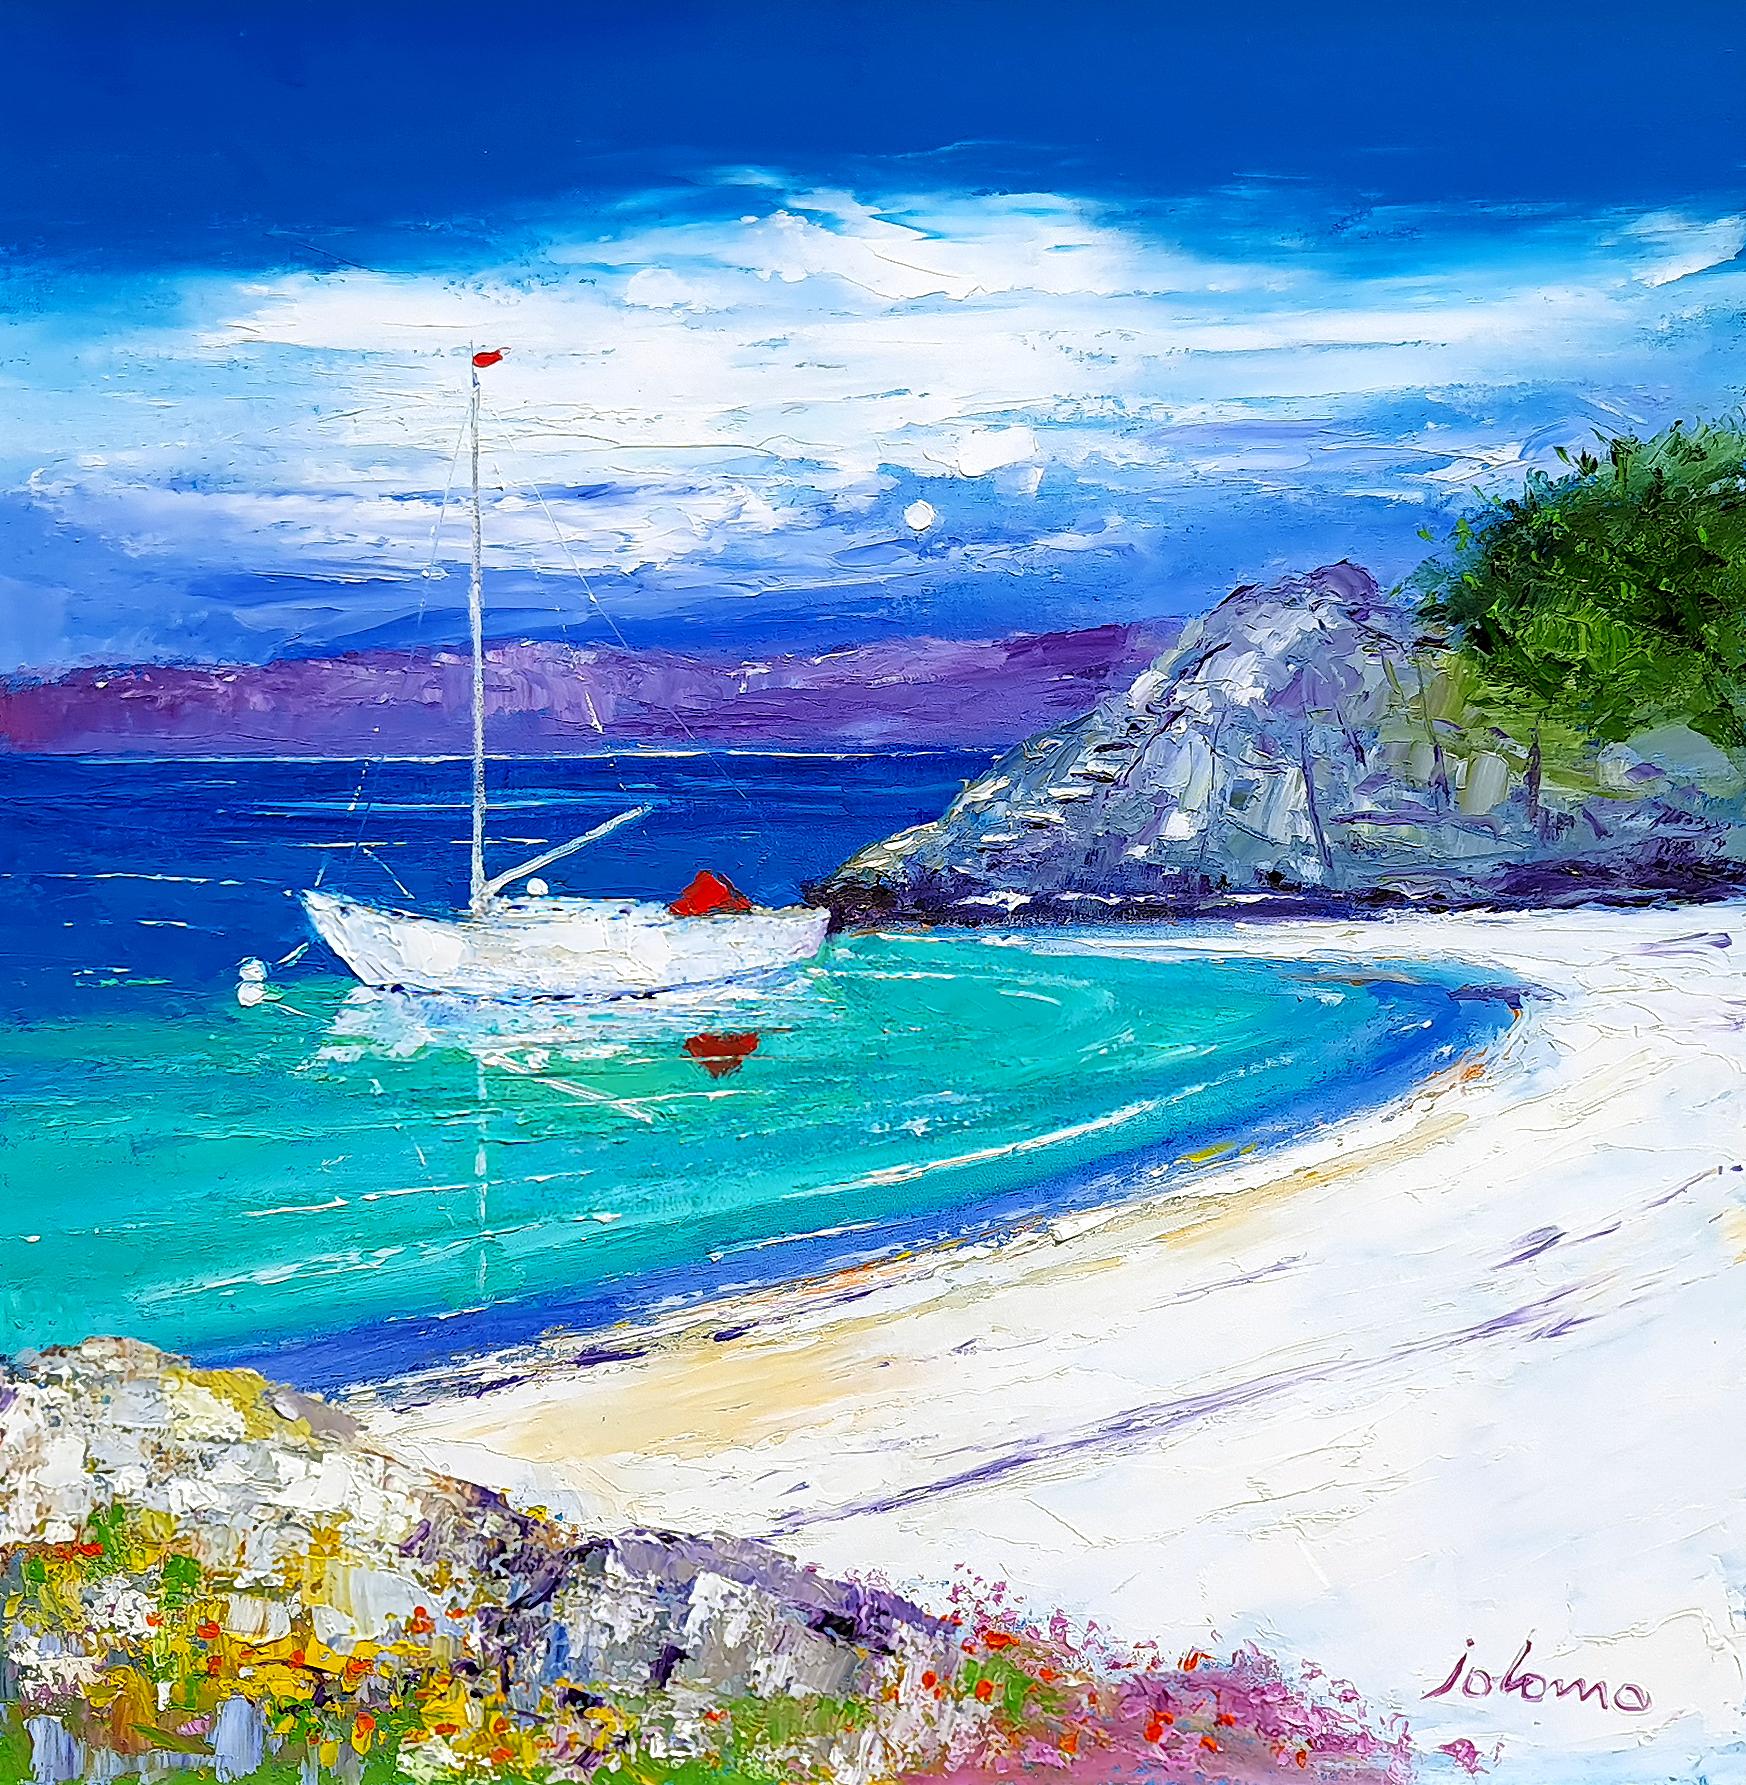 The White Boat and Red Tent, Isle of Gigha - Painting by JOLOMO - John Lowrie Morrison OBE